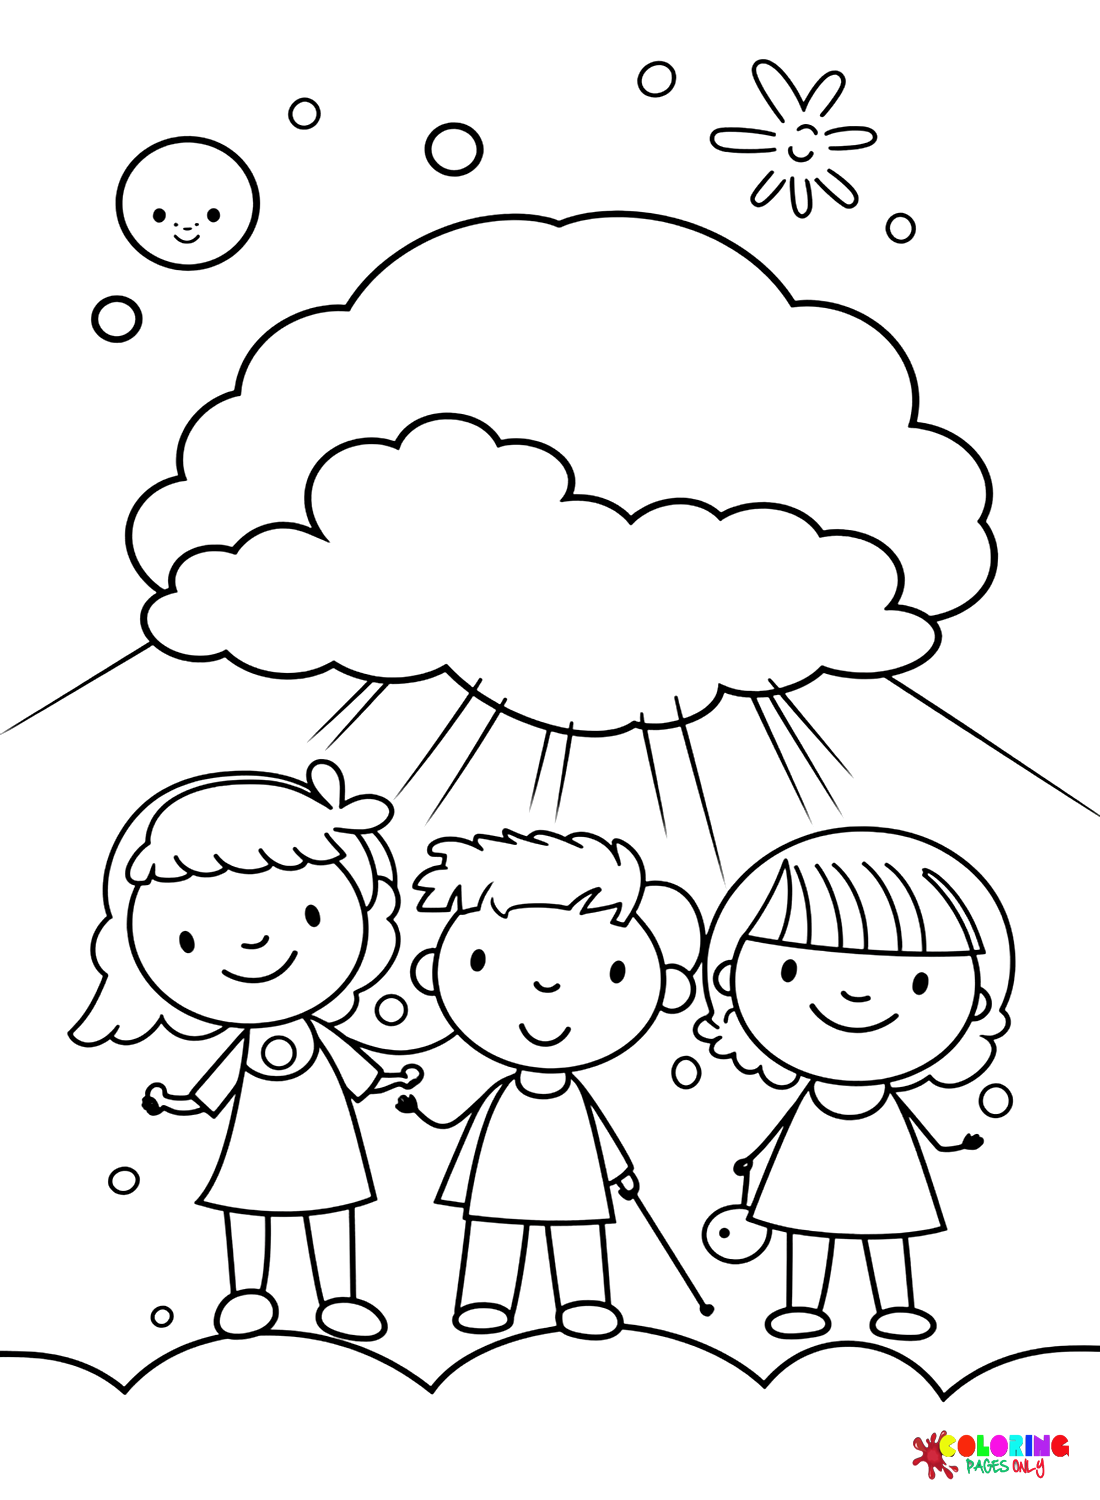 Children’s Day Images Coloring Pages